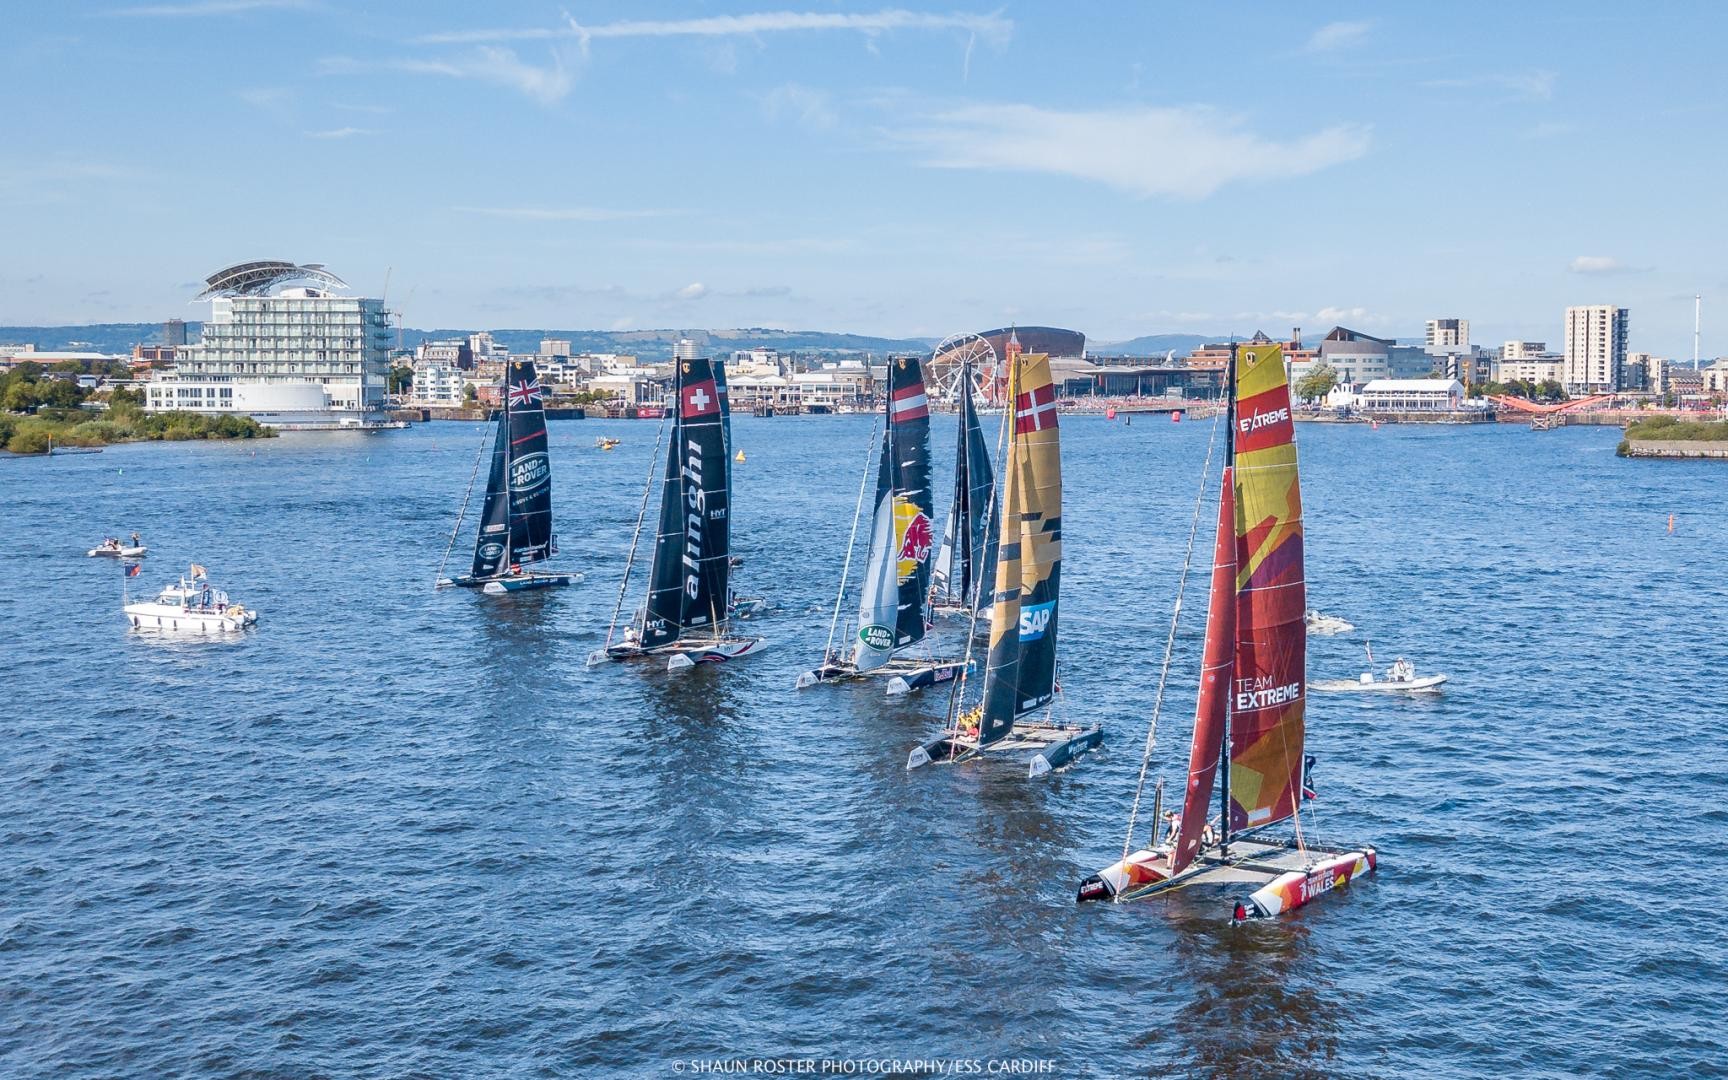 Six GC32 catamarans pre-start, before the foiling kicks off on the waters of Cardiff Harbour in 2017